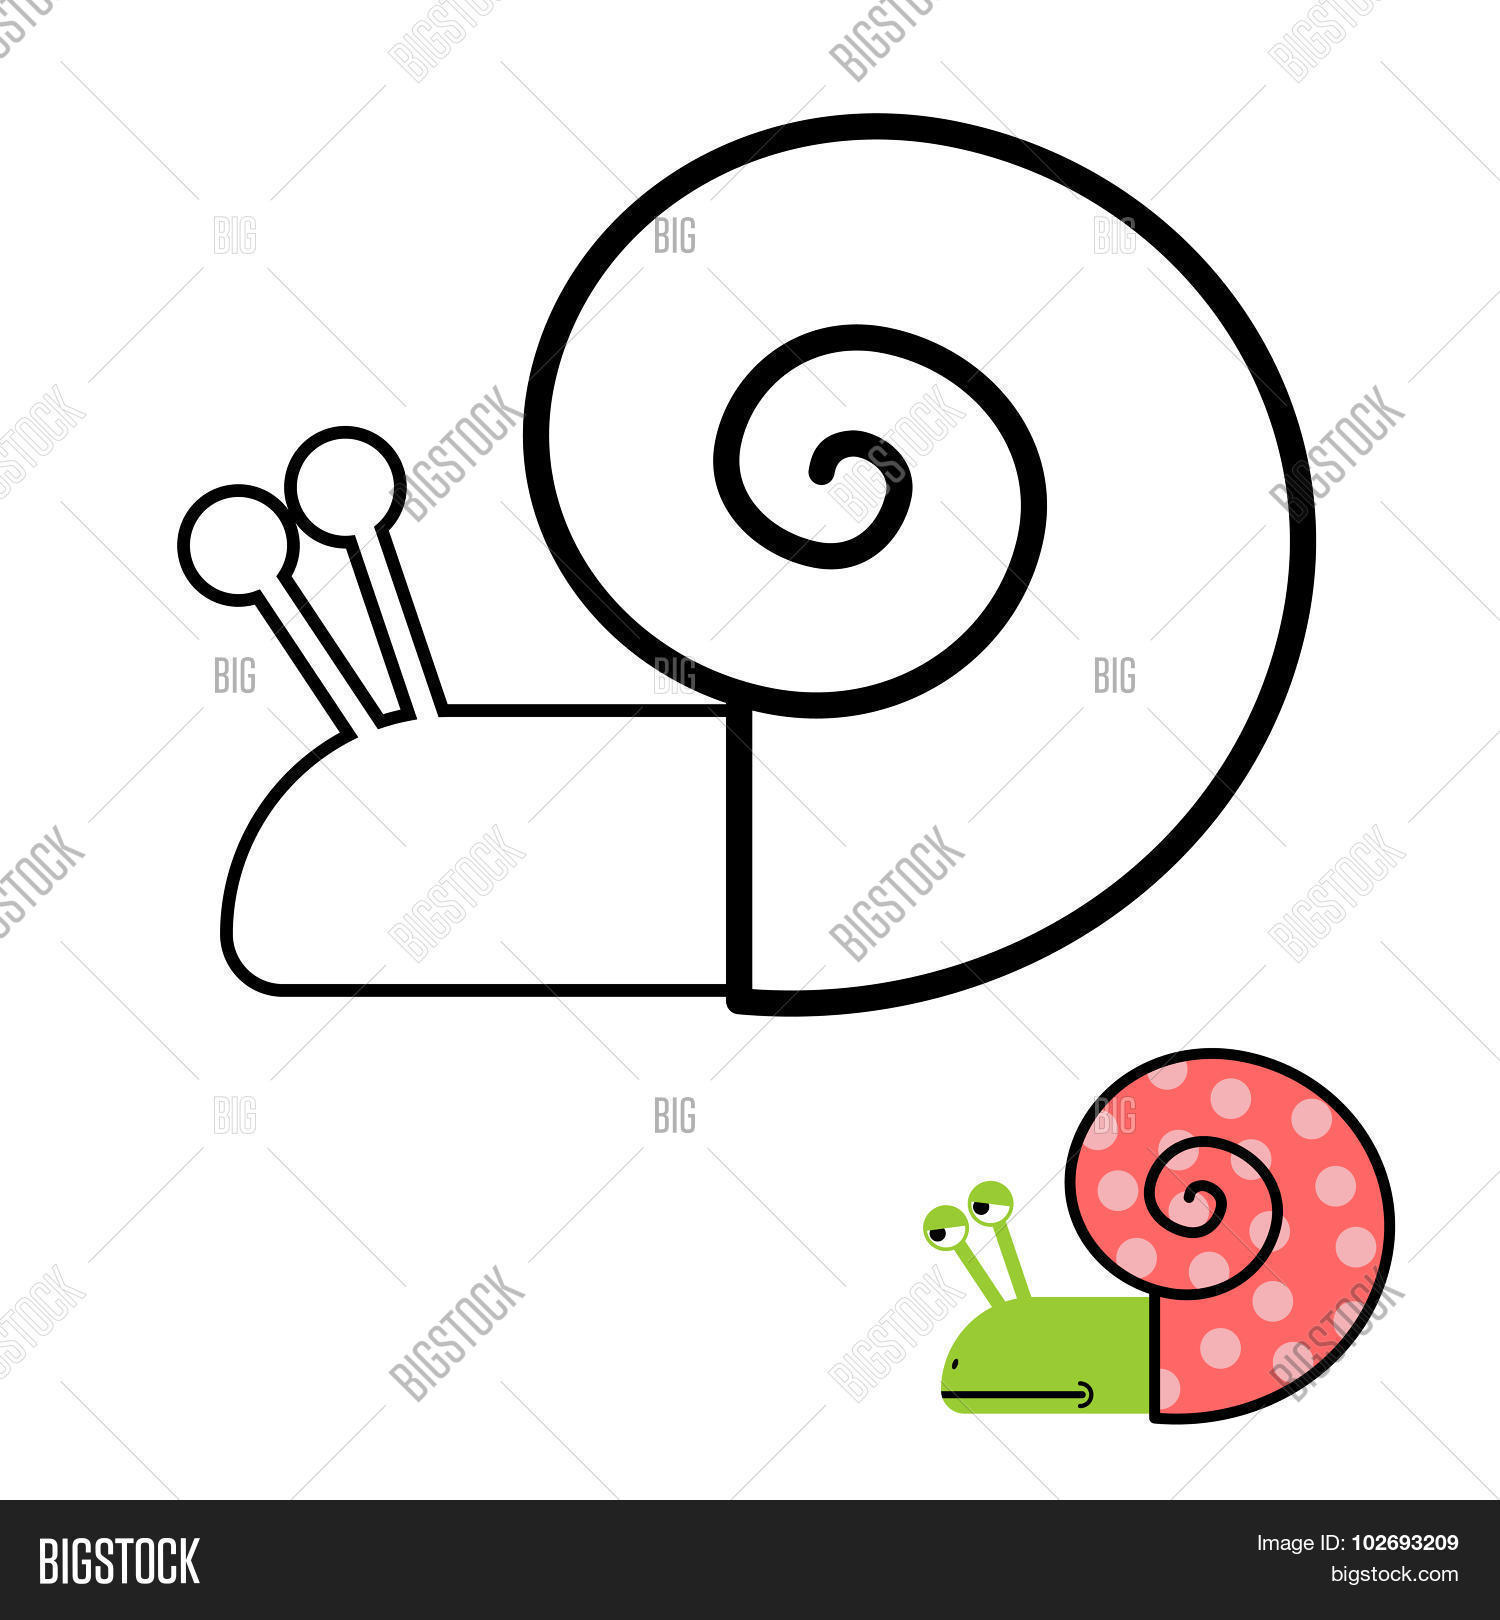 Snail Coloring Book. Gastropoda Clam With Spiral Shell. Vector.